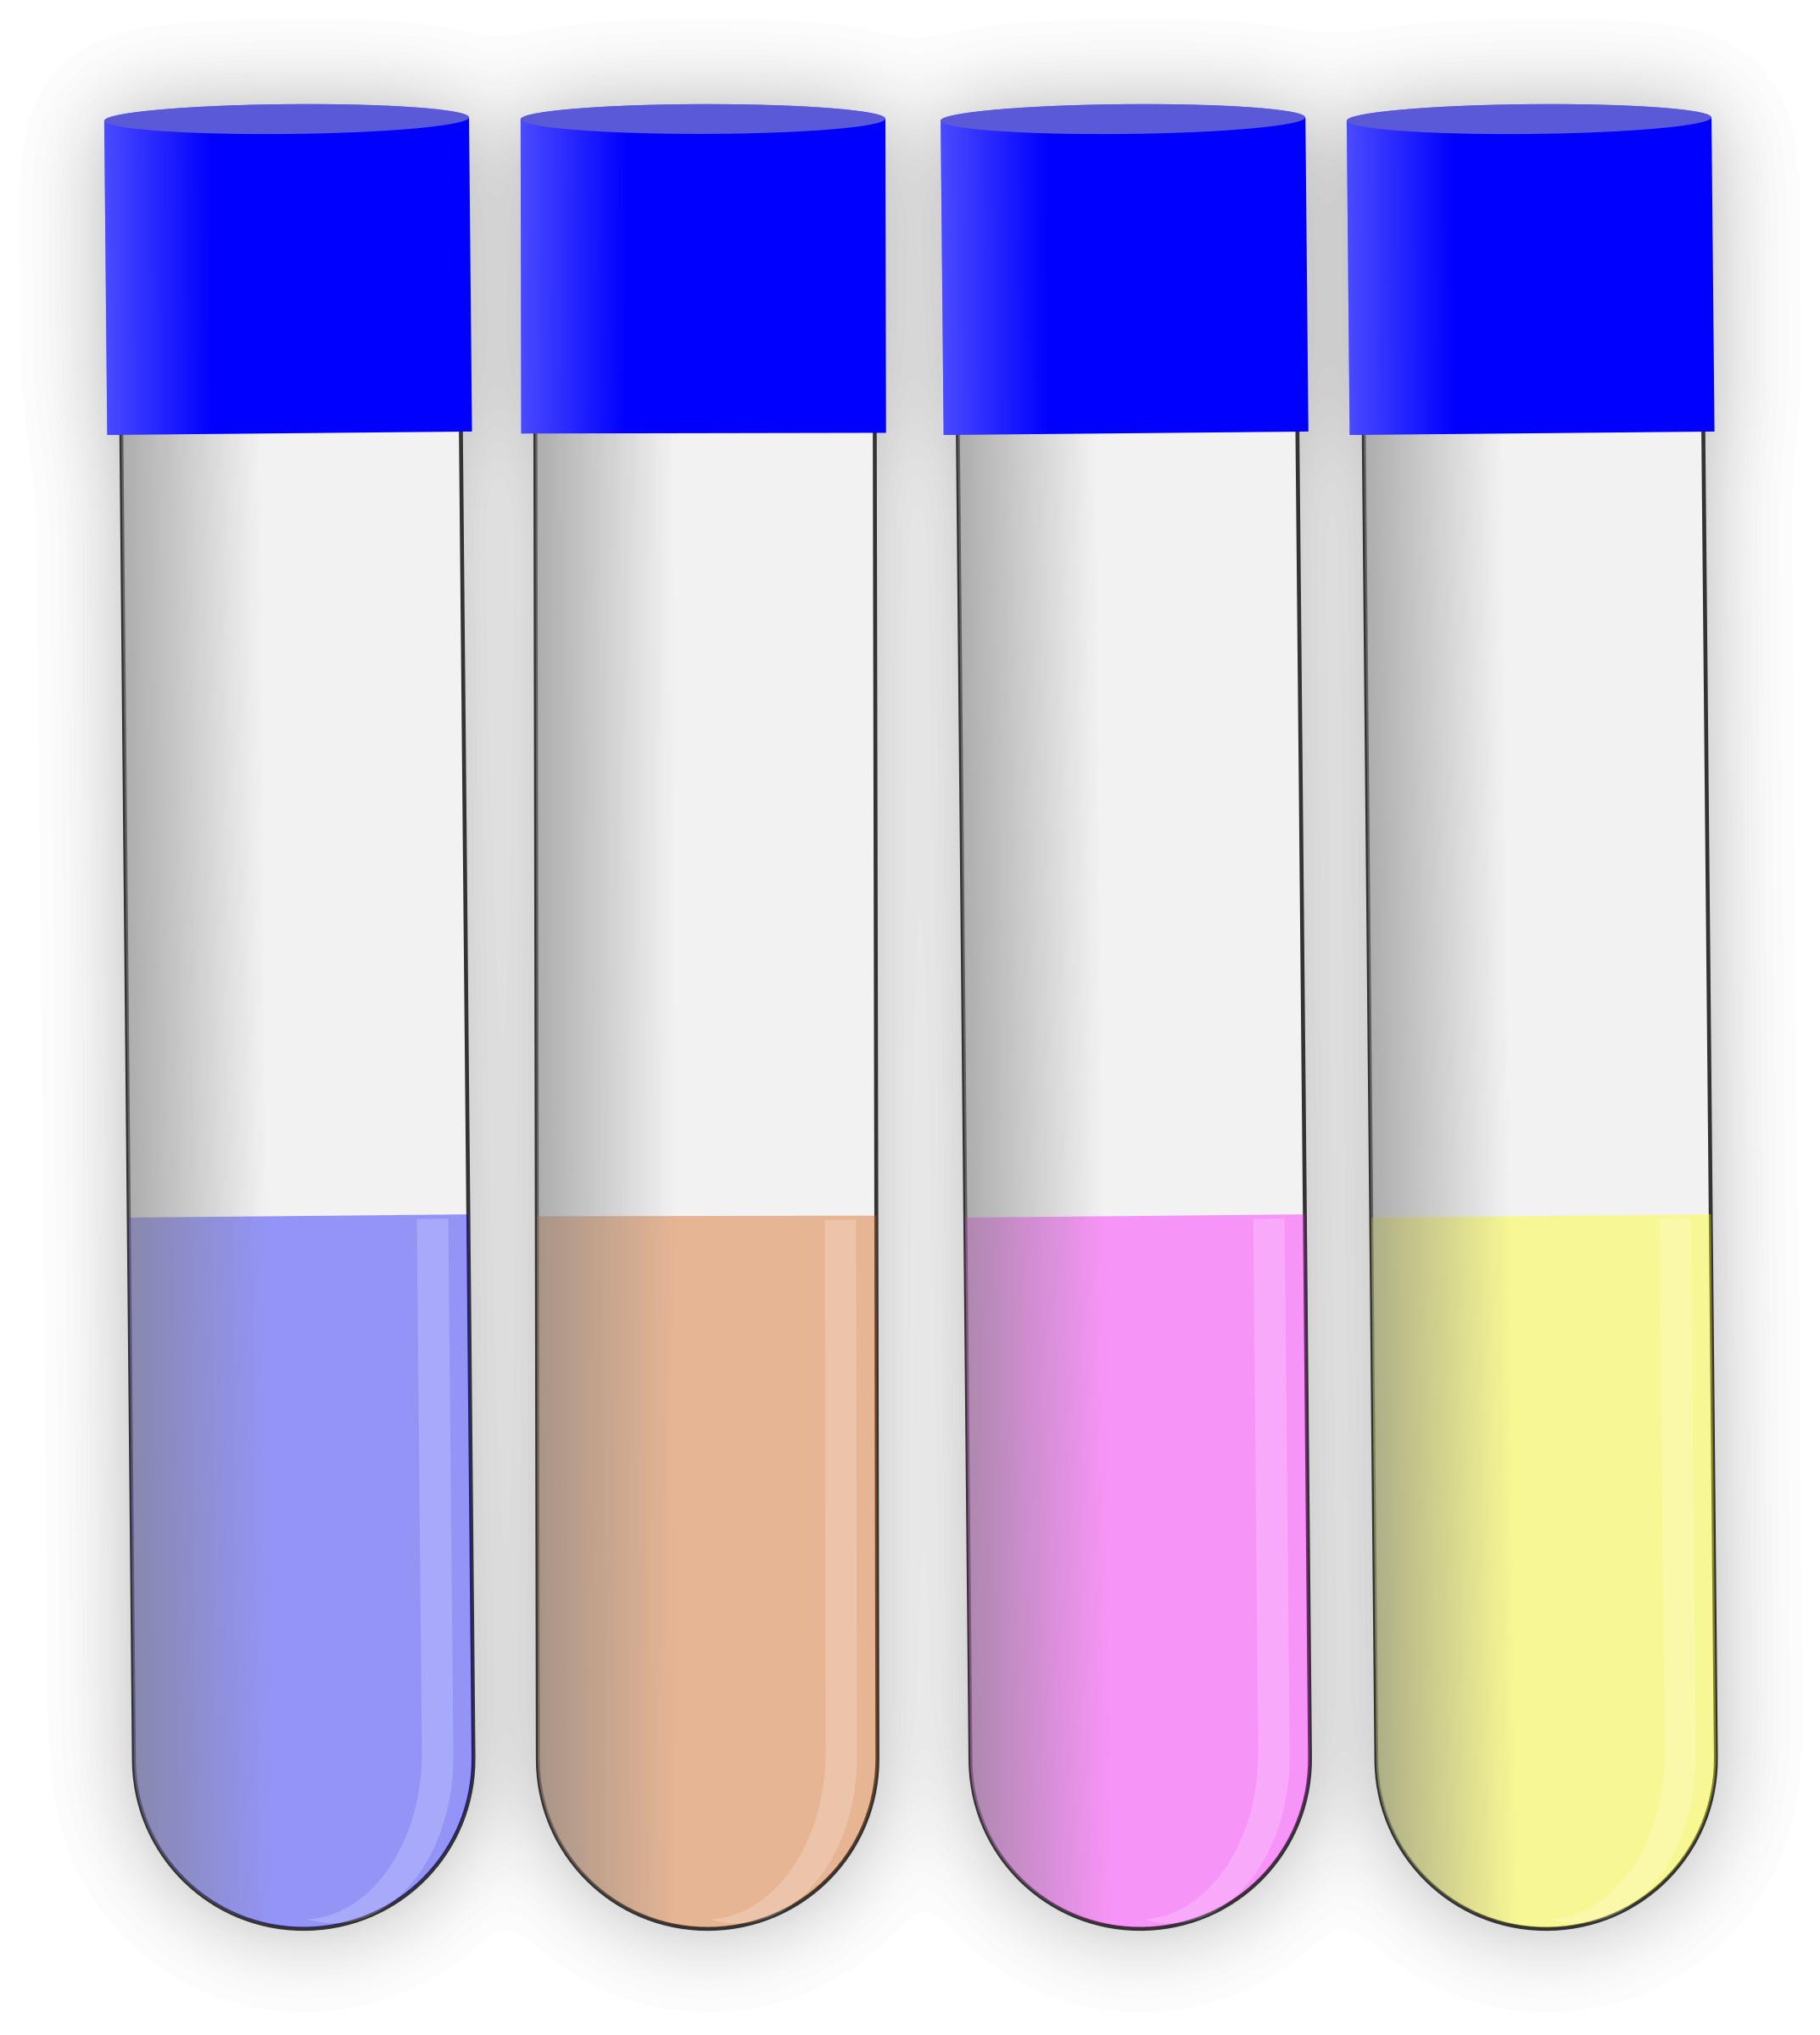 Test Tubes (With Caps) png